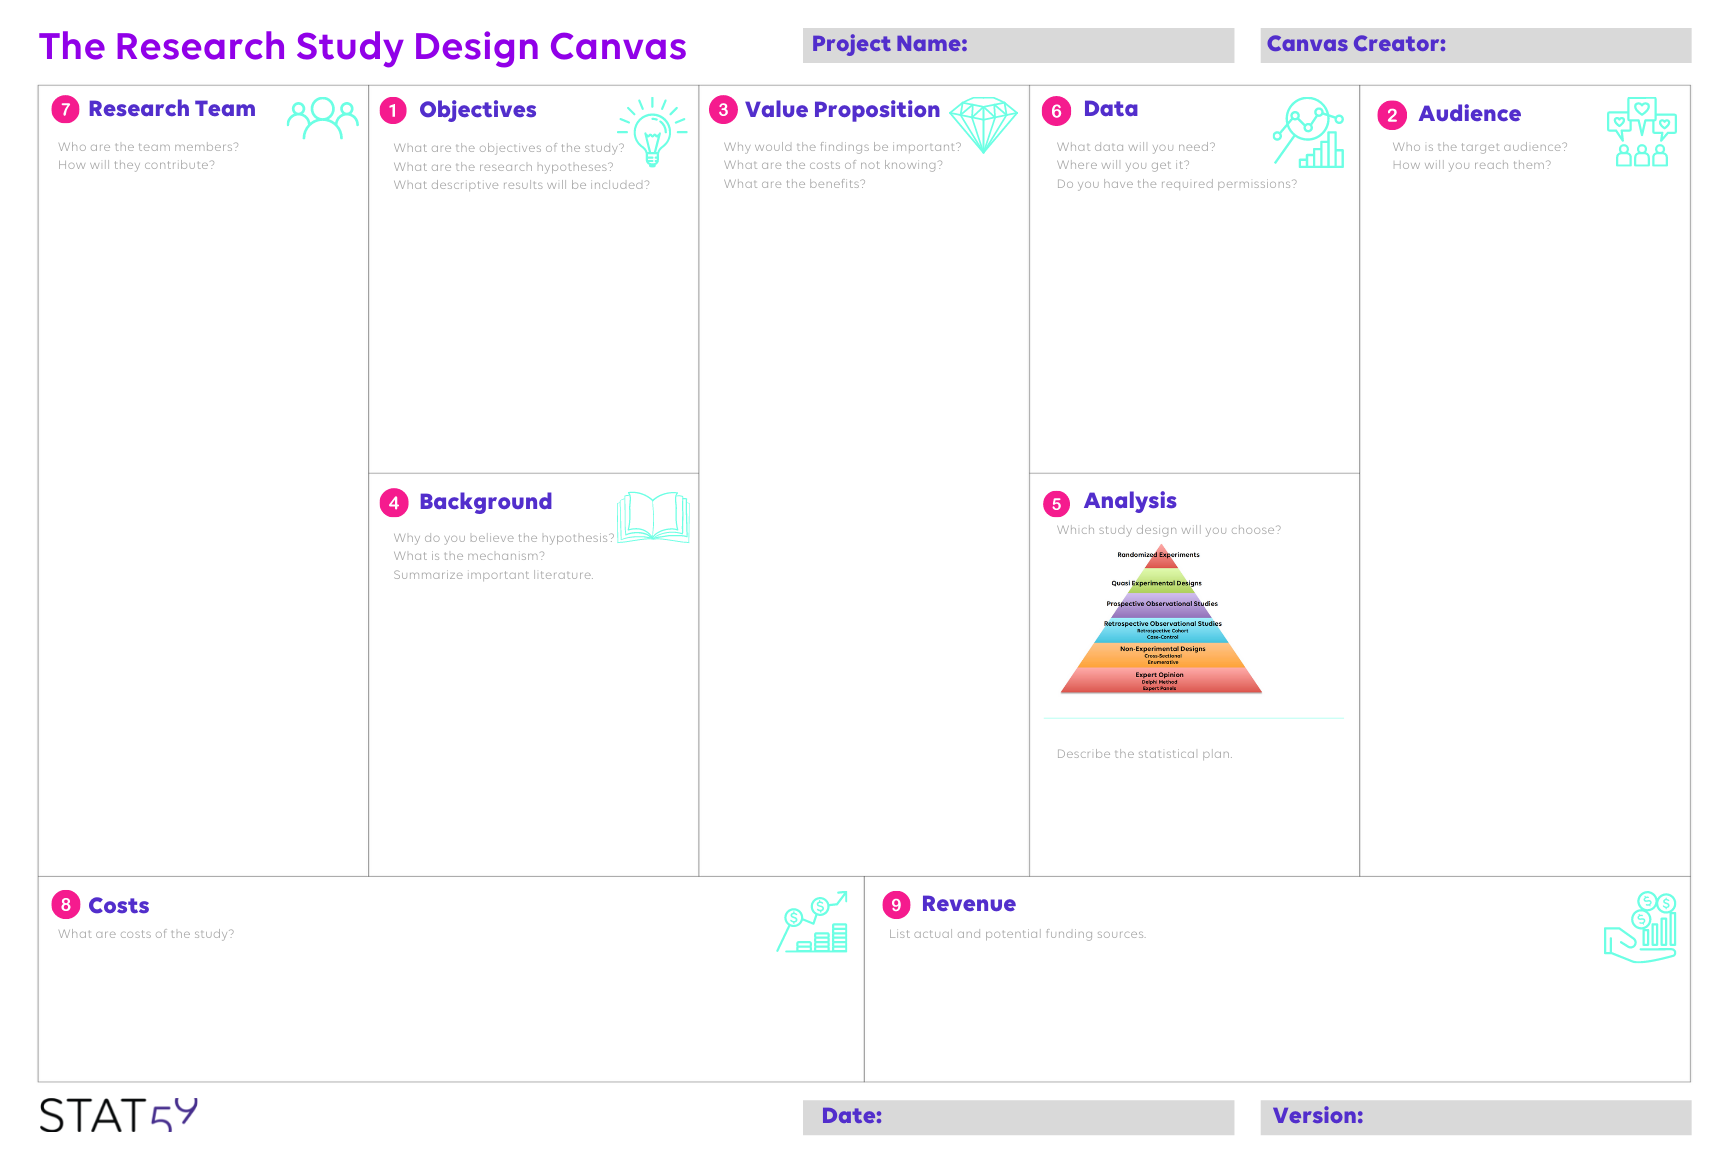 The Research Study Design Canvas